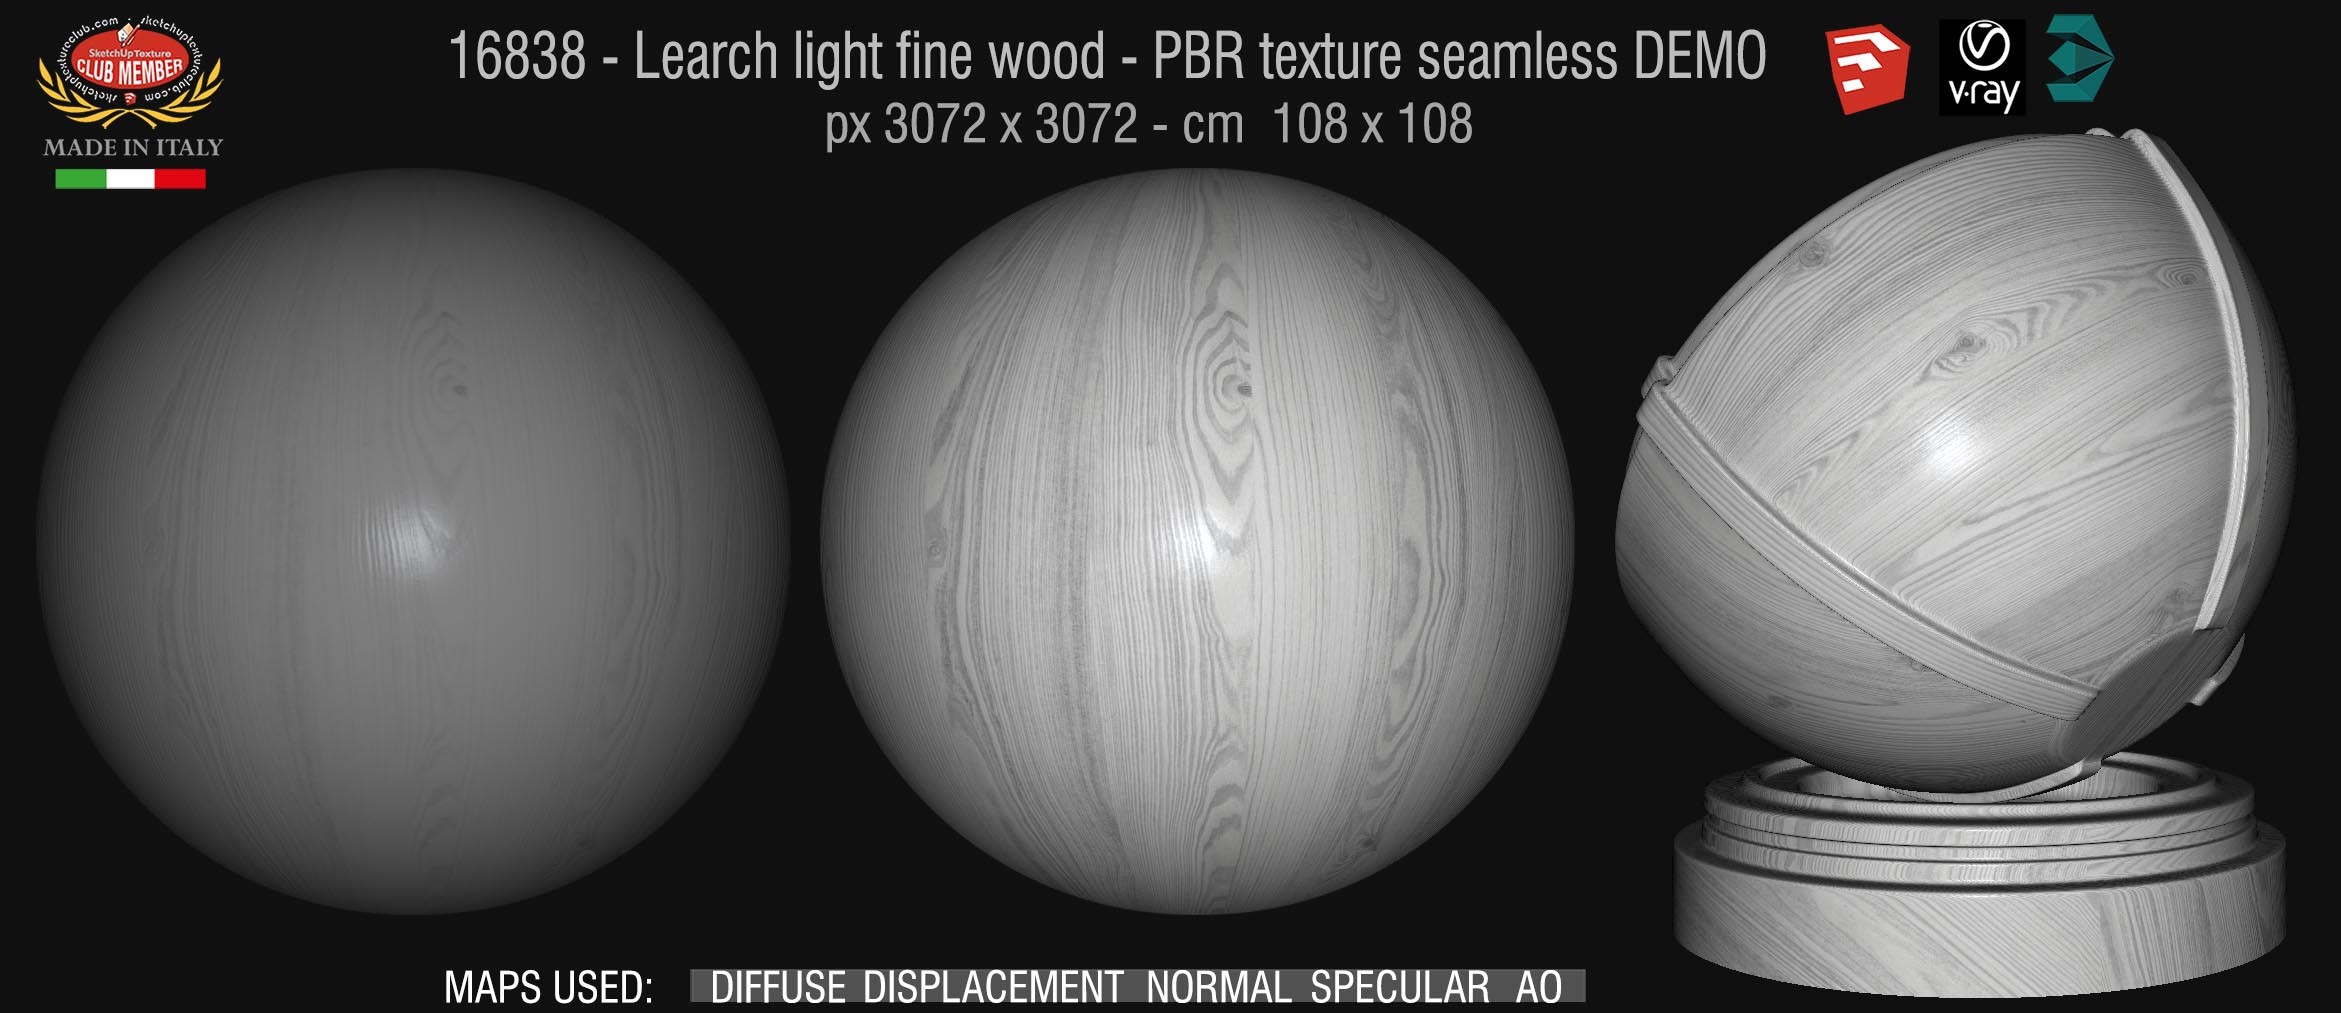 16838 Learch light fine wood - PBR texture seamless DEMO